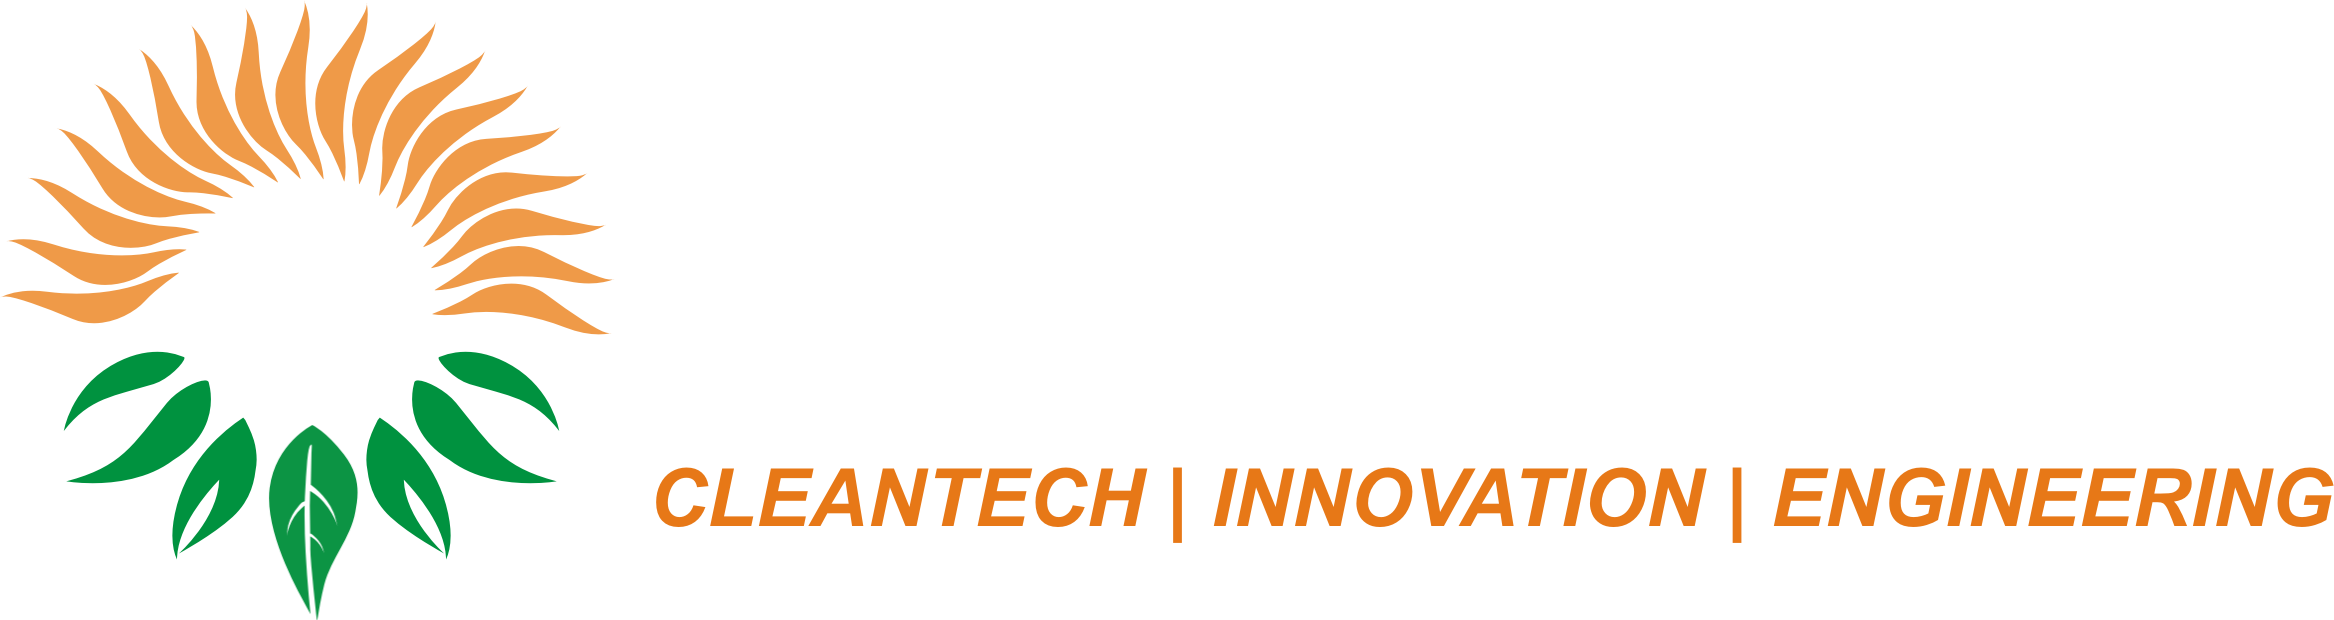 Organic Recycling Systems Limited Logo